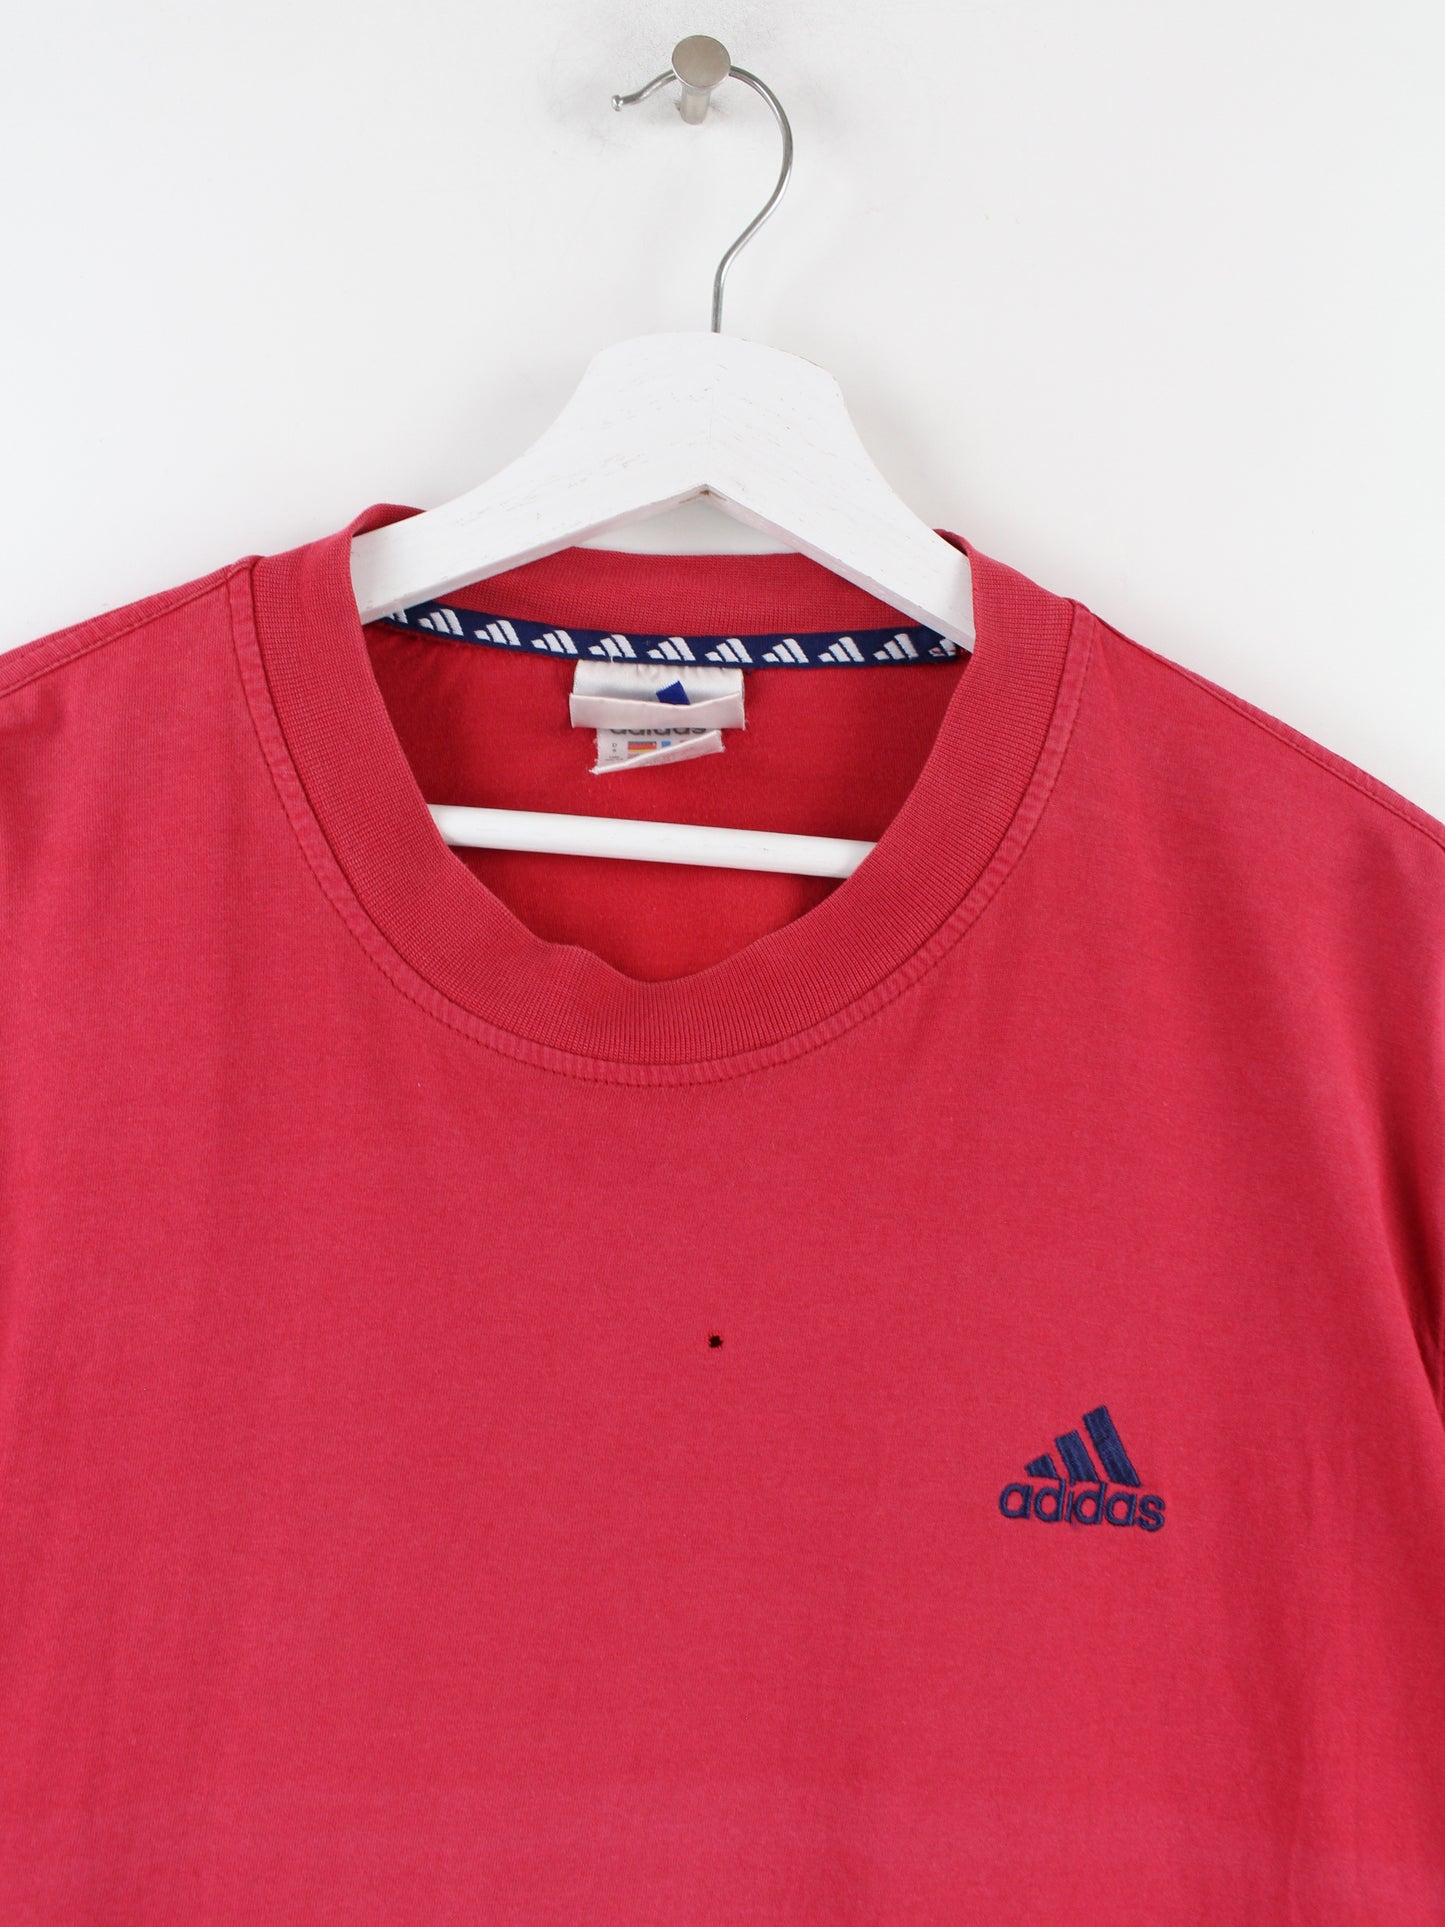 Adidas 90s T-Shirt Red L